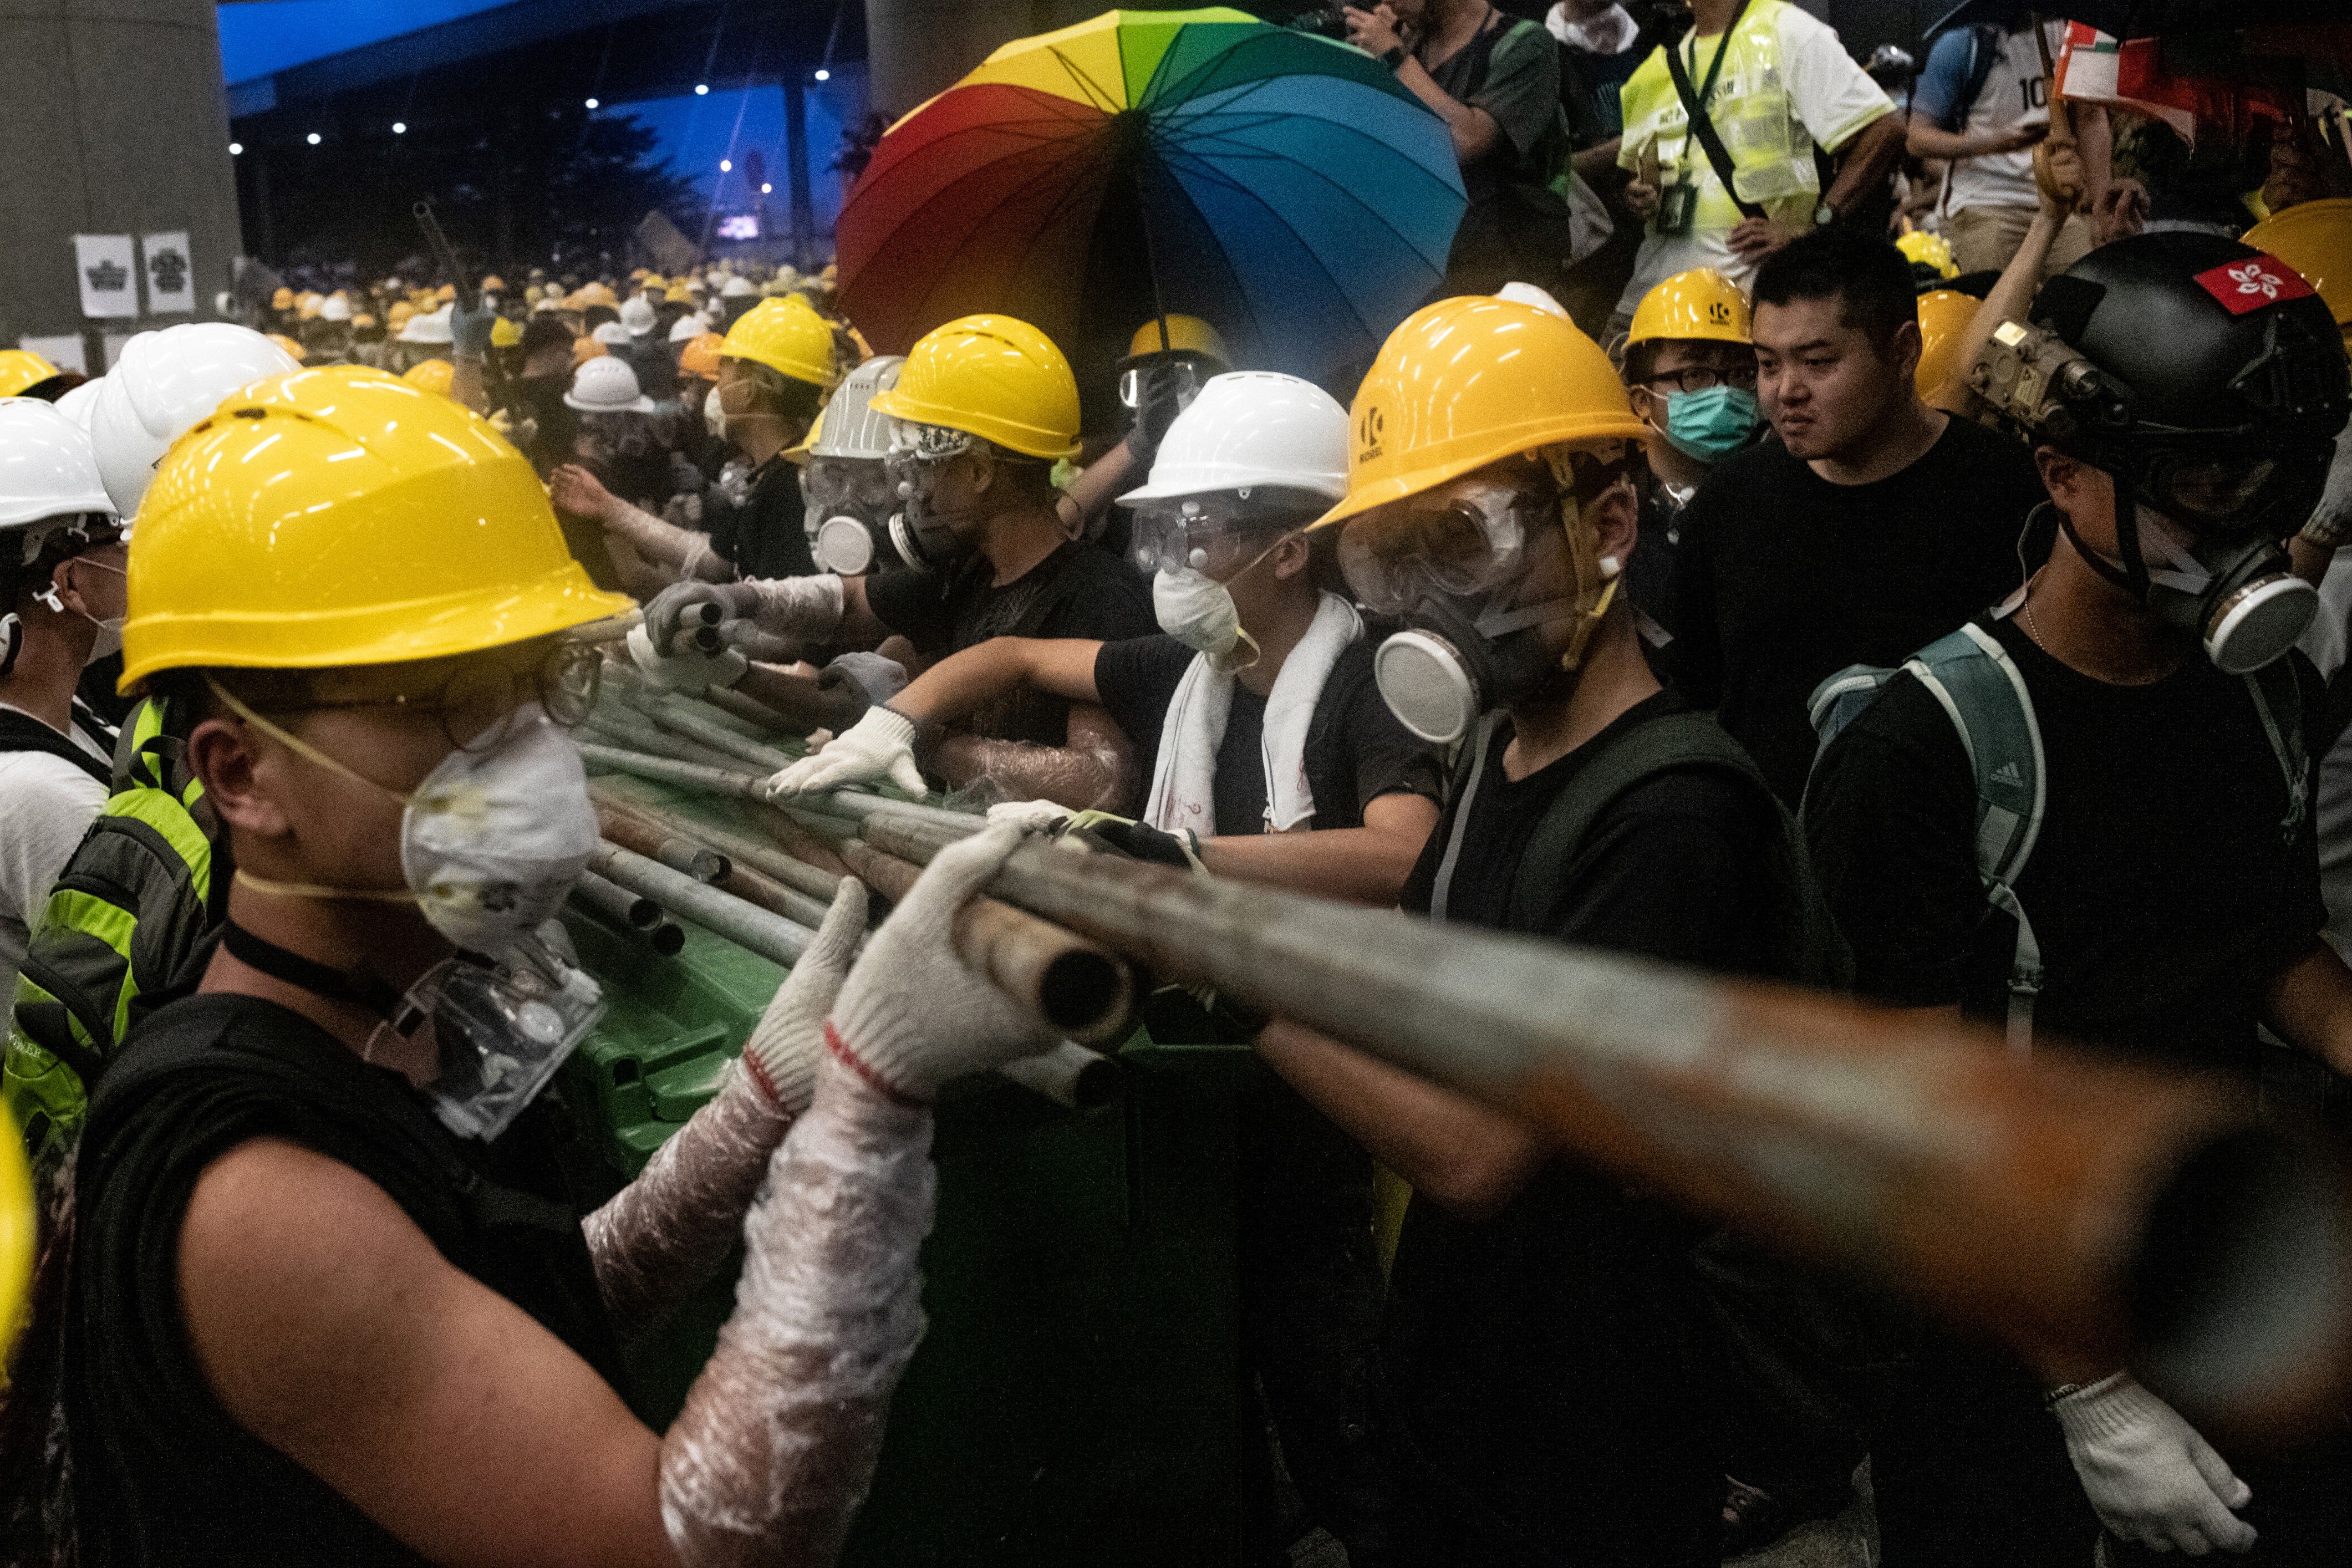 Protesters use metal rods to smash glass doors and windows of the government headquarters in Hong Kong on July 1.